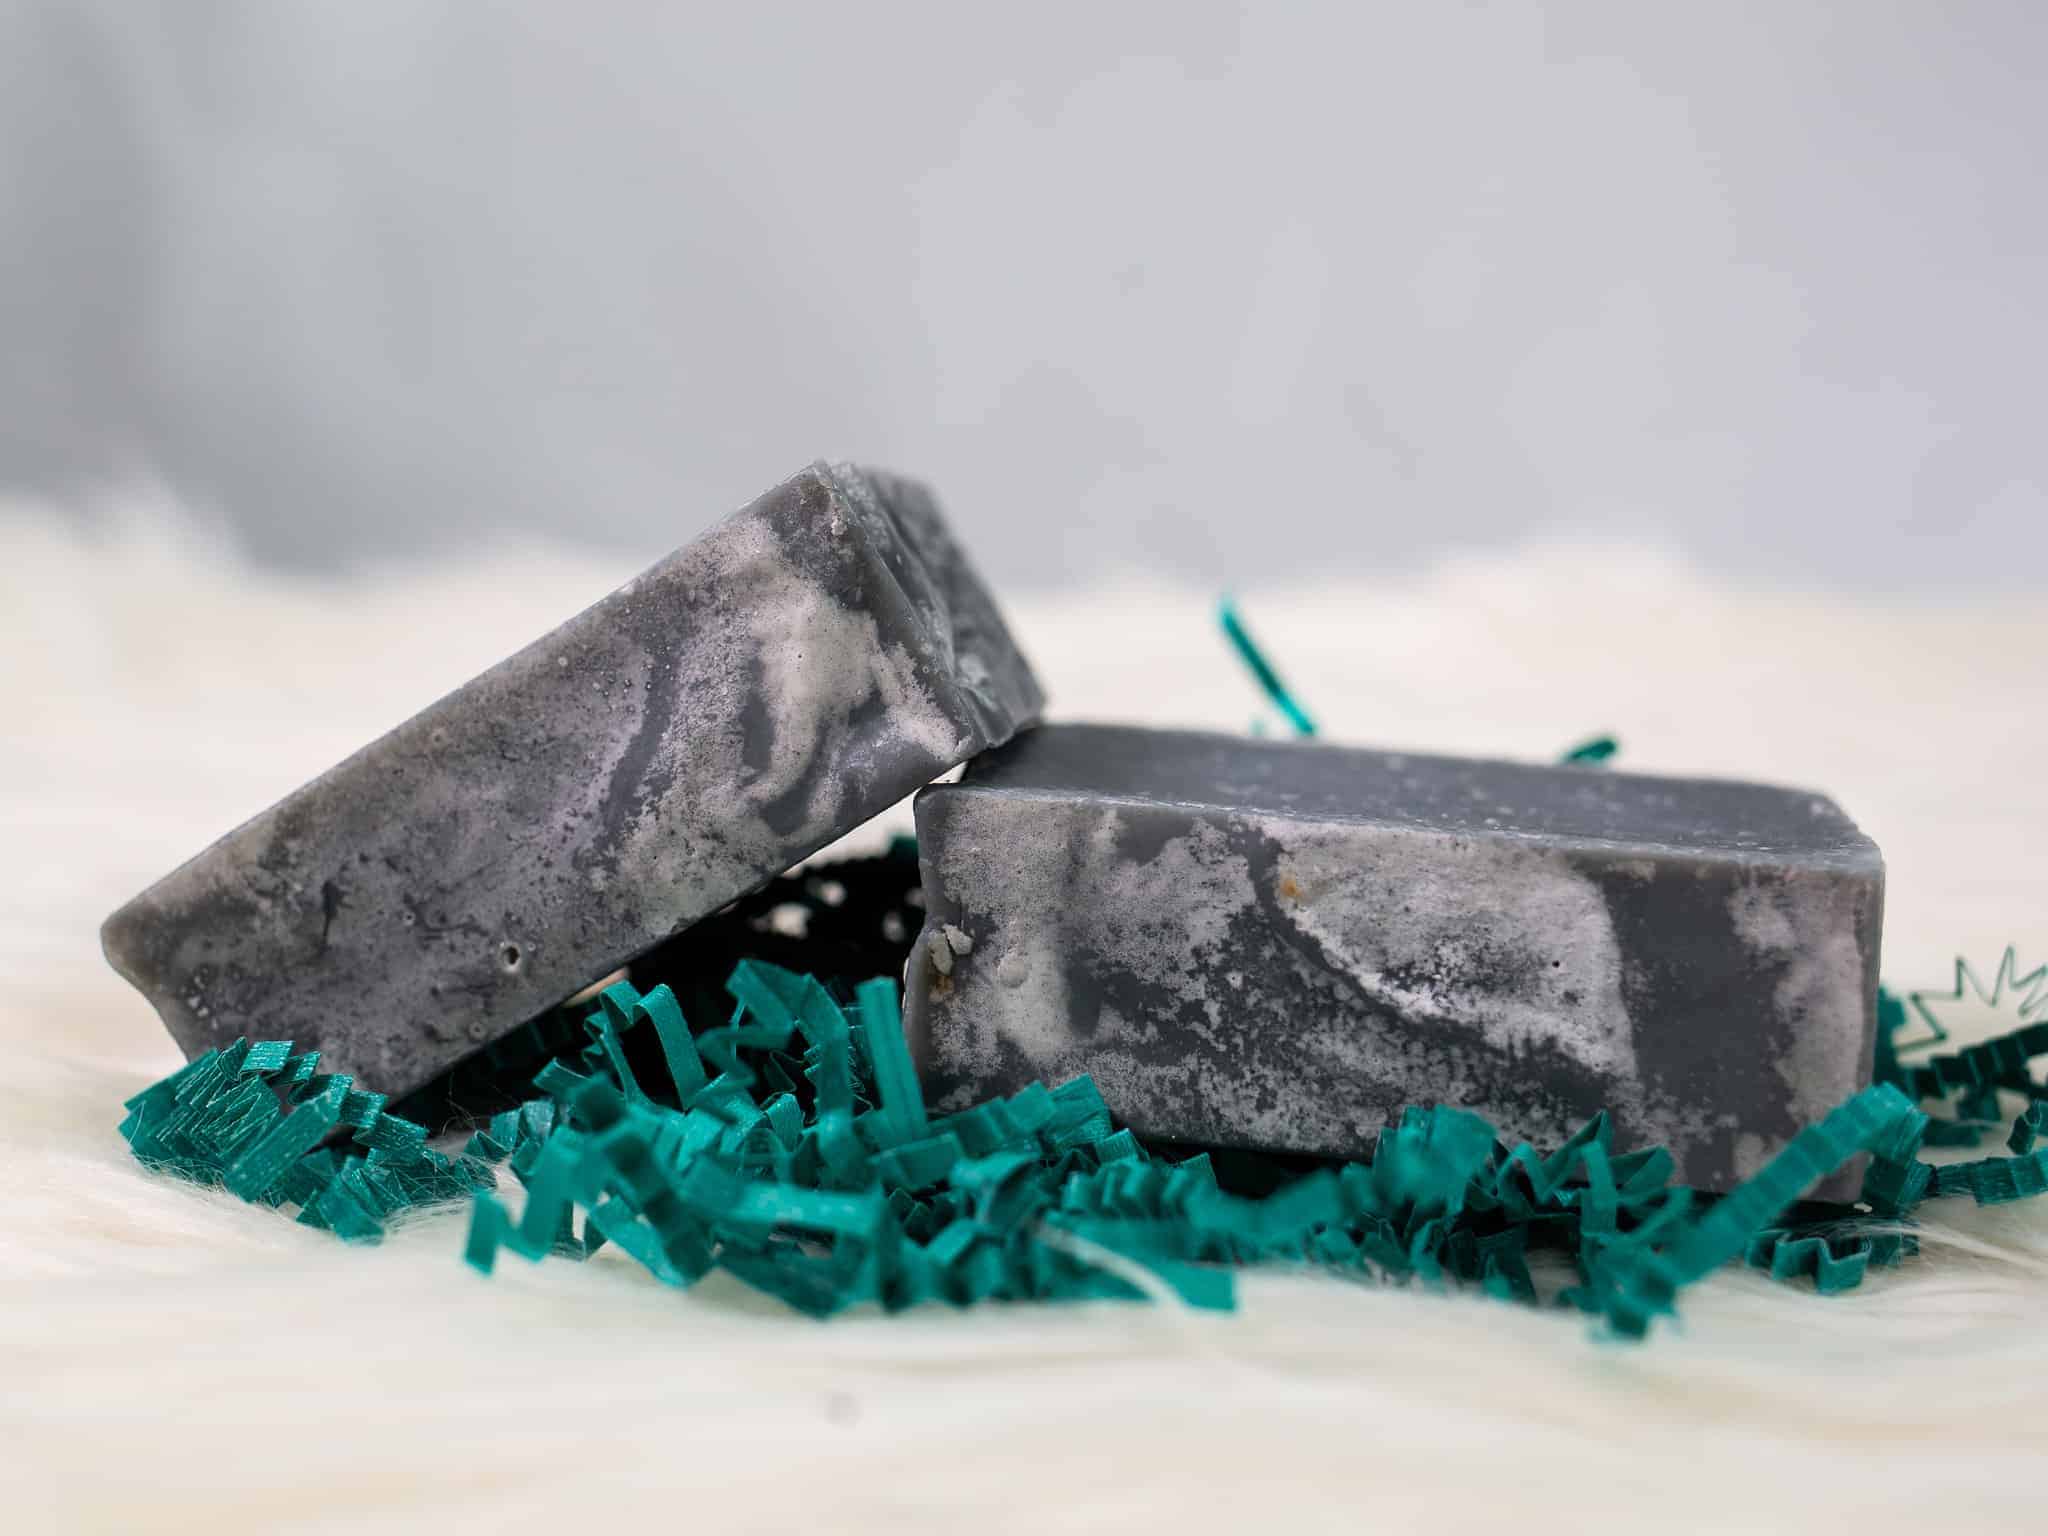 This Organic Tea Tree soap with Activated Charcoal is made with love by Sudzy Bums! Shop more unique gift ideas today with Spots Initiatives, the best way to support creators.